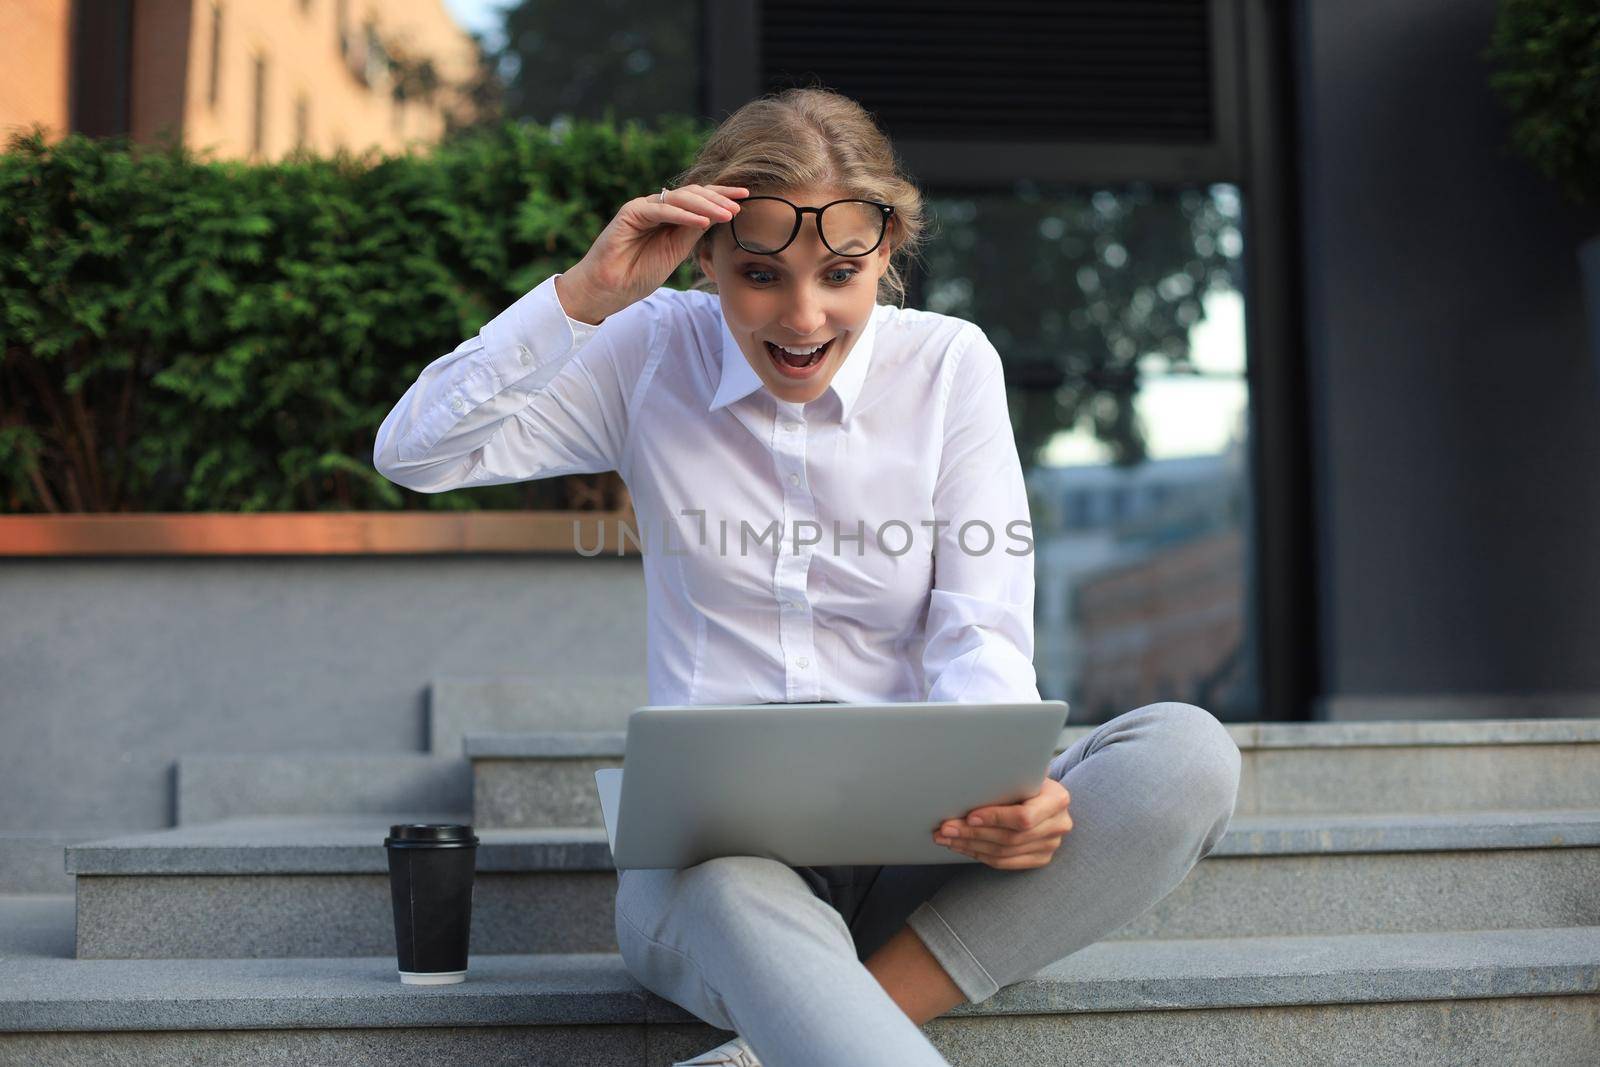 Beautiful excited business woman sitting near business center and using laptop